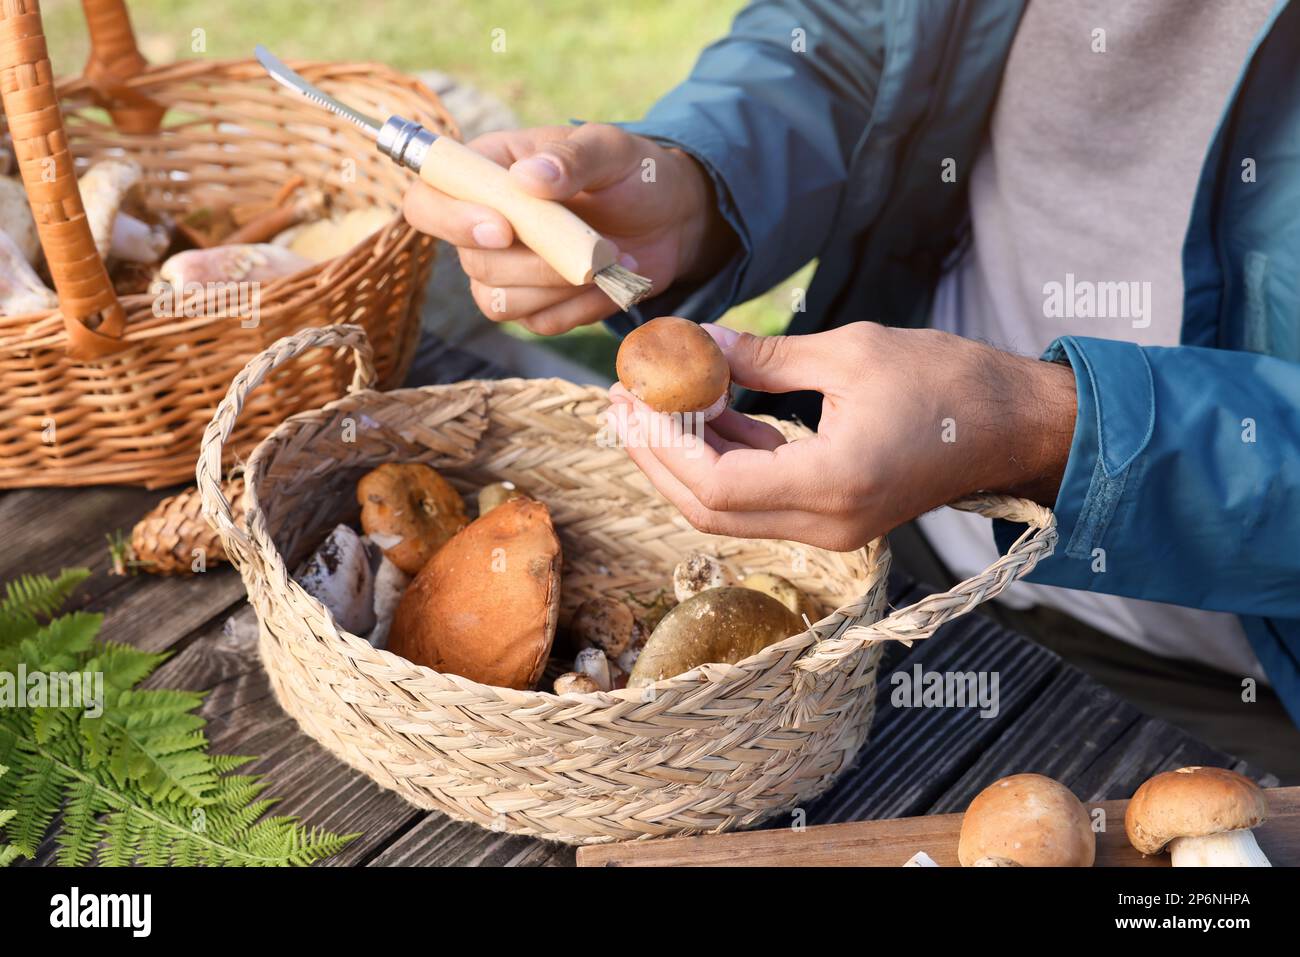 https://c8.alamy.com/comp/2P6NHPA/man-cleaning-mushroom-with-brush-on-knife-at-table-outdoors-closeup-2P6NHPA.jpg